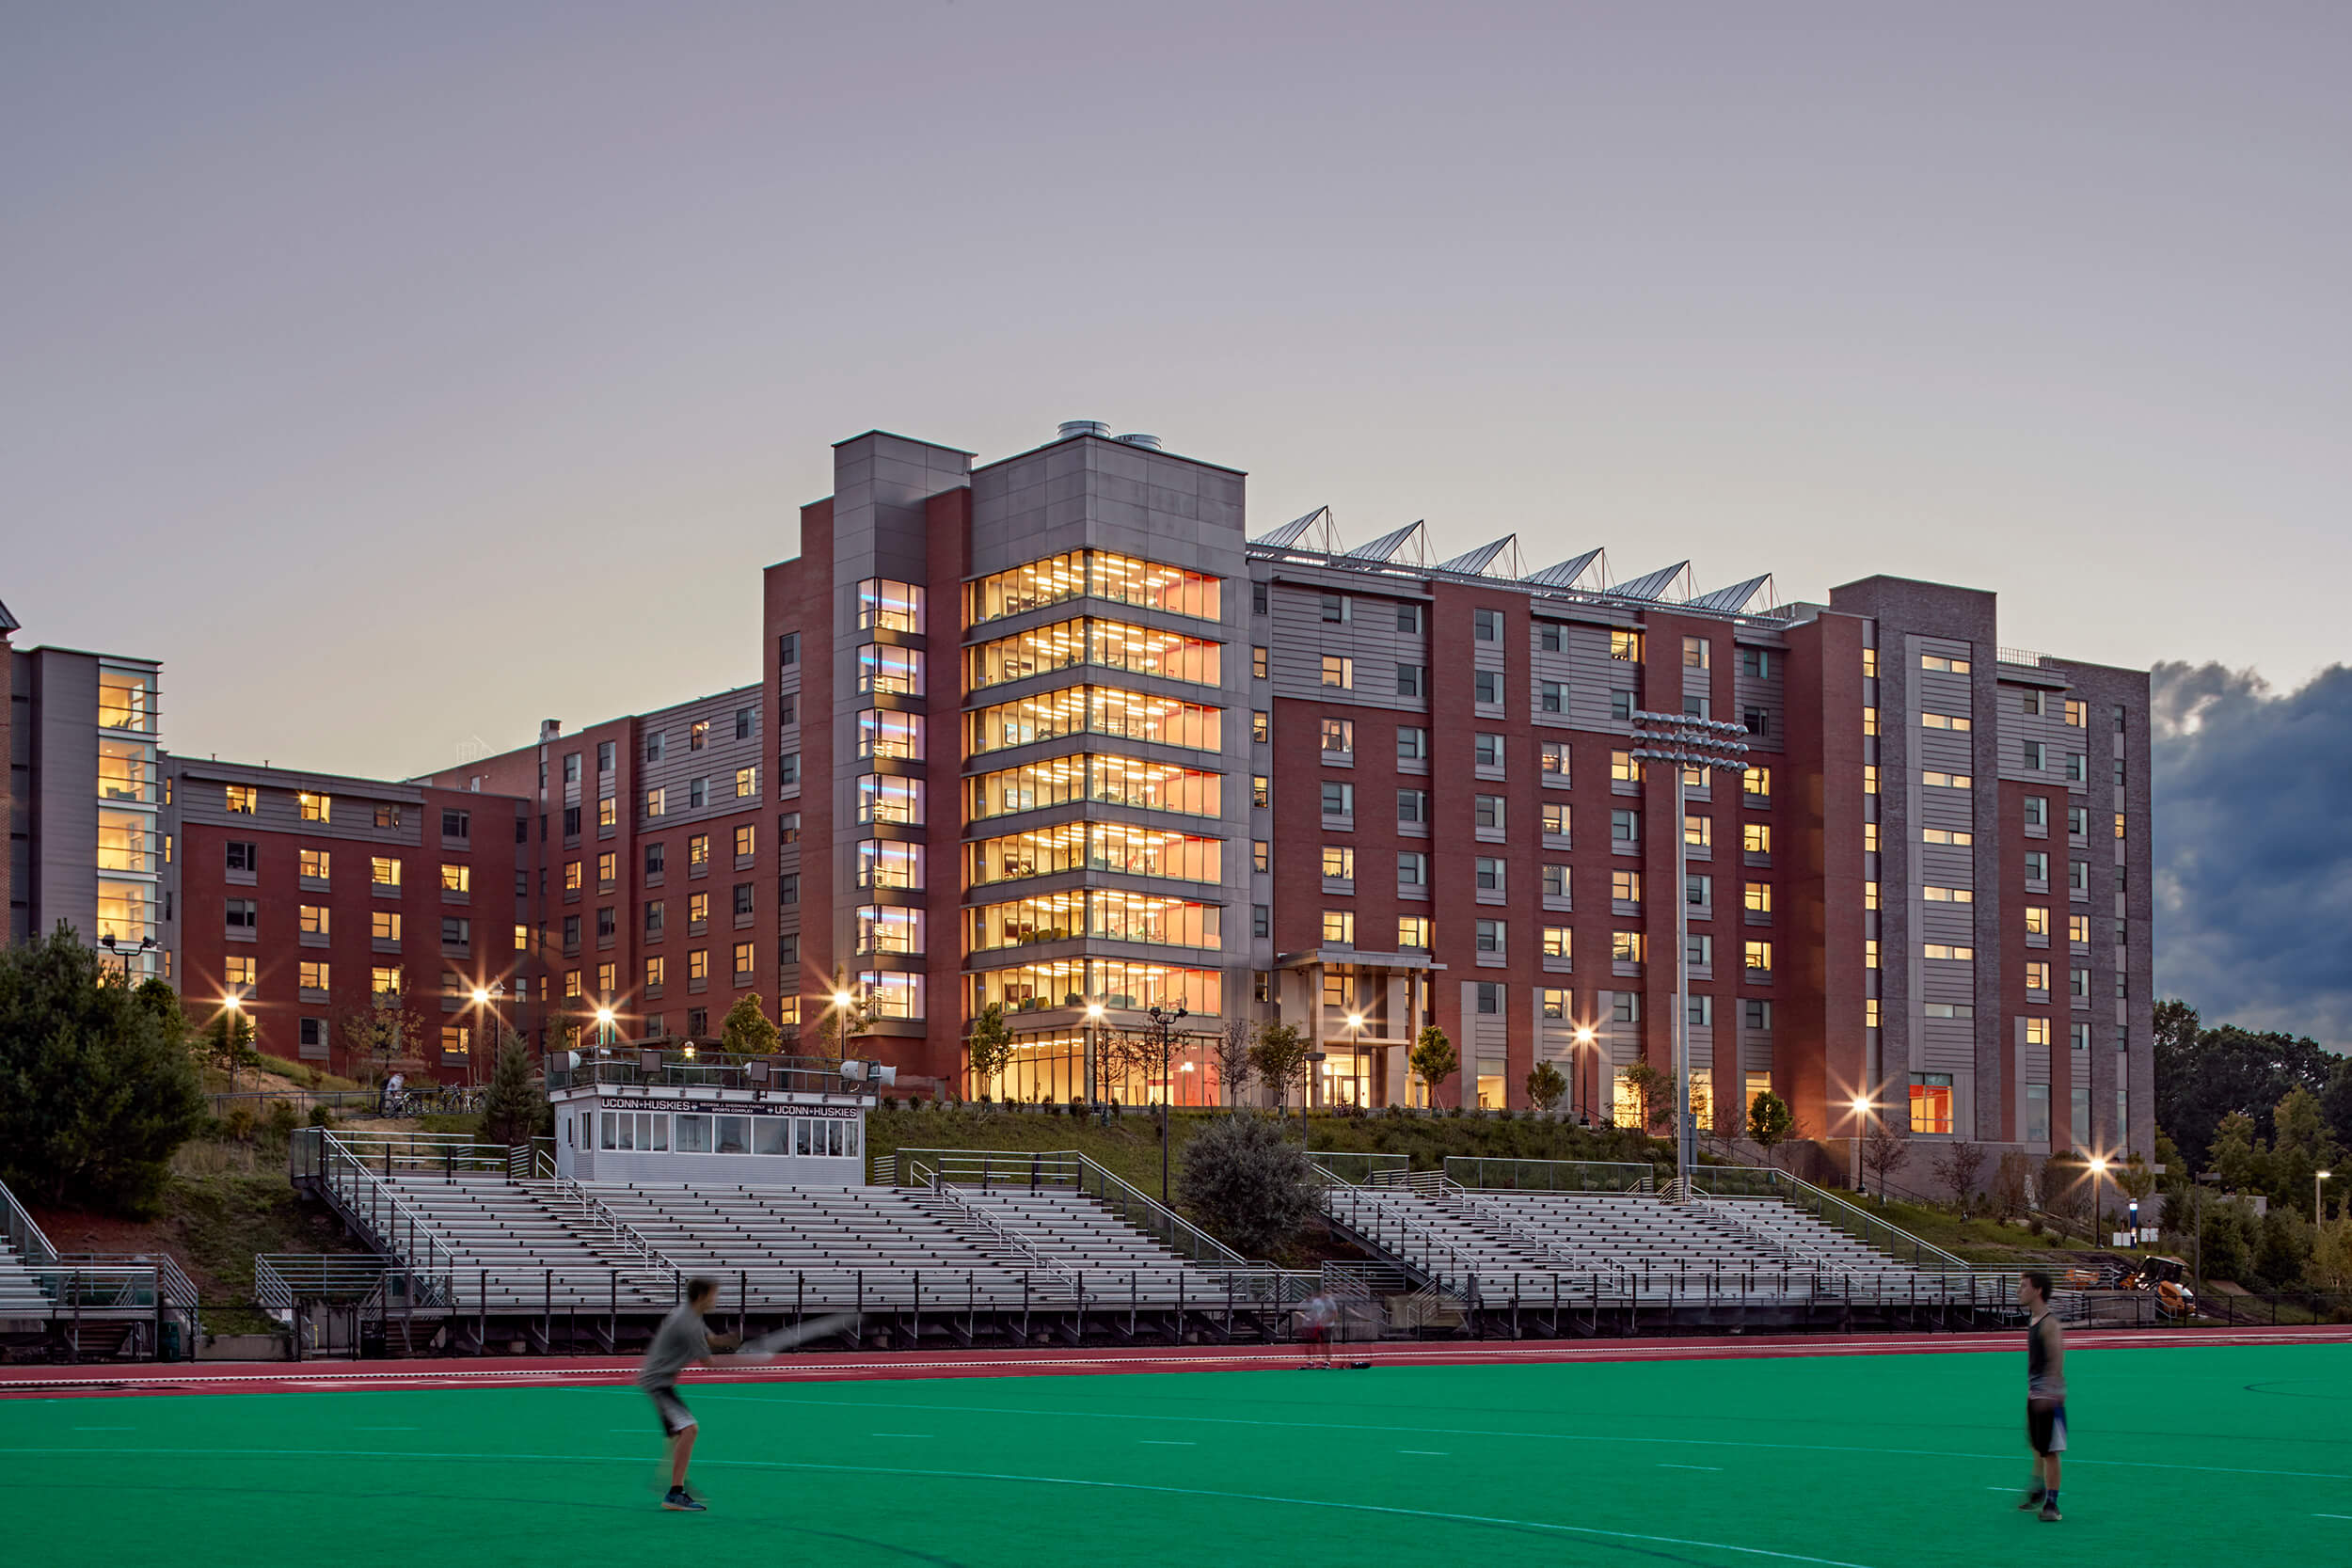 Exterior view of a college campus building as seen across an athletic field. The photo appears to be taken at dusk, with lighting illuminating the building from within.